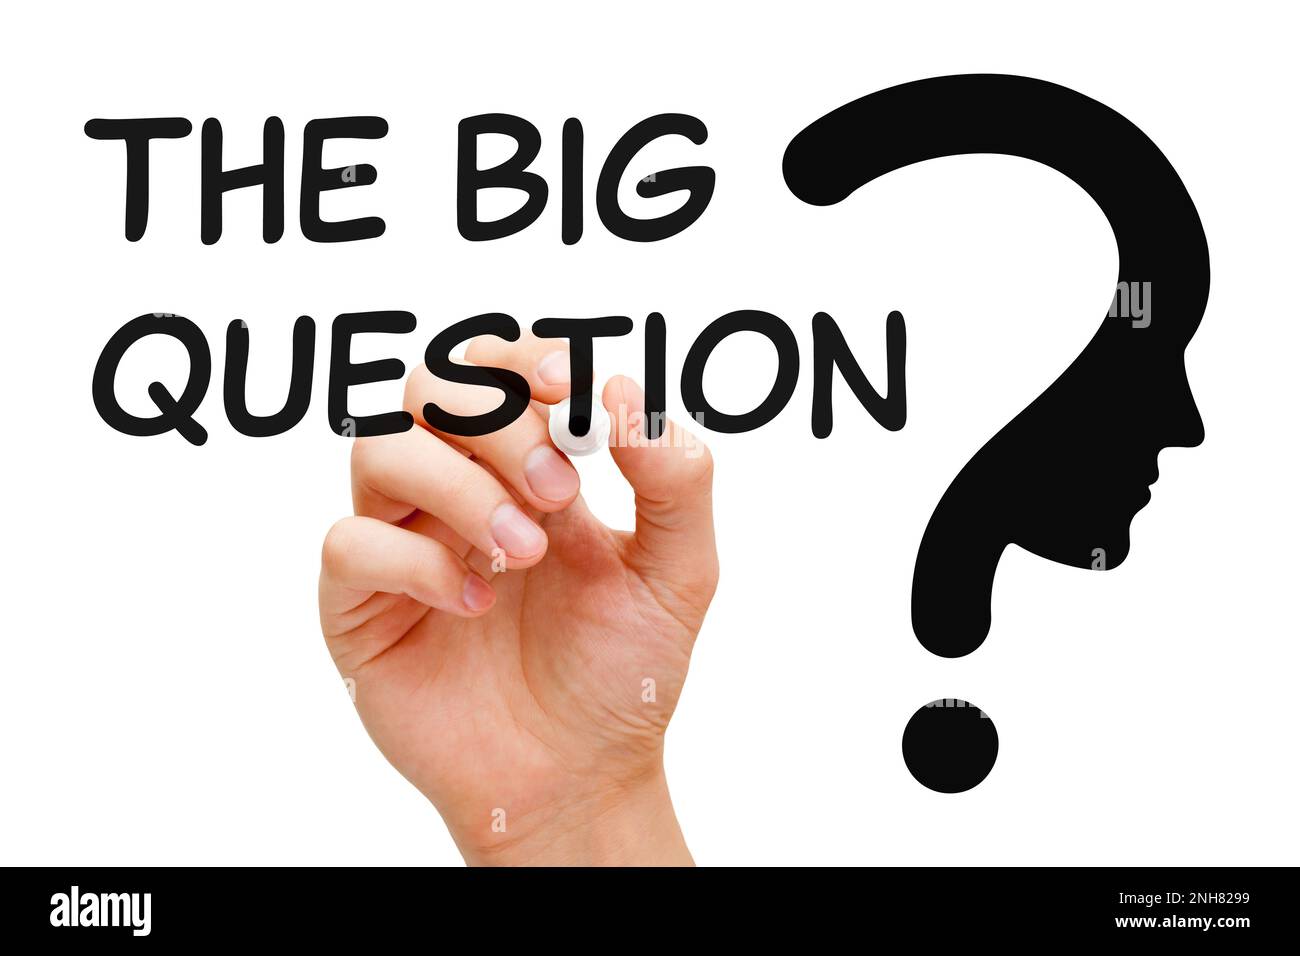 Hand writing The Big Question next to a big question mark. Concept about purpose and meaning of life, philosophy, and existential questions. Stock Photo